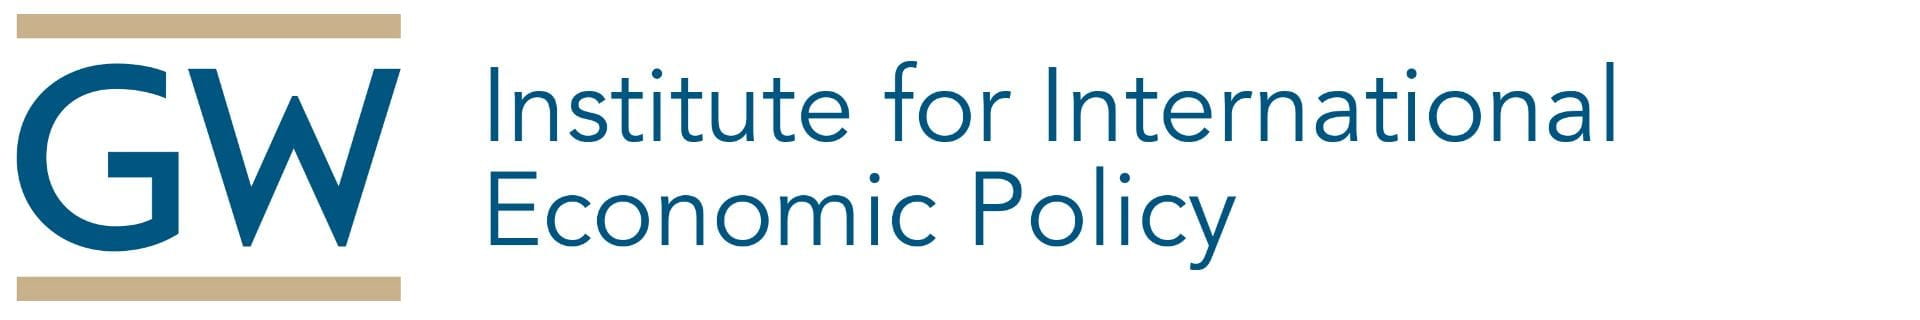 logo of the Institute for International Economic Policy